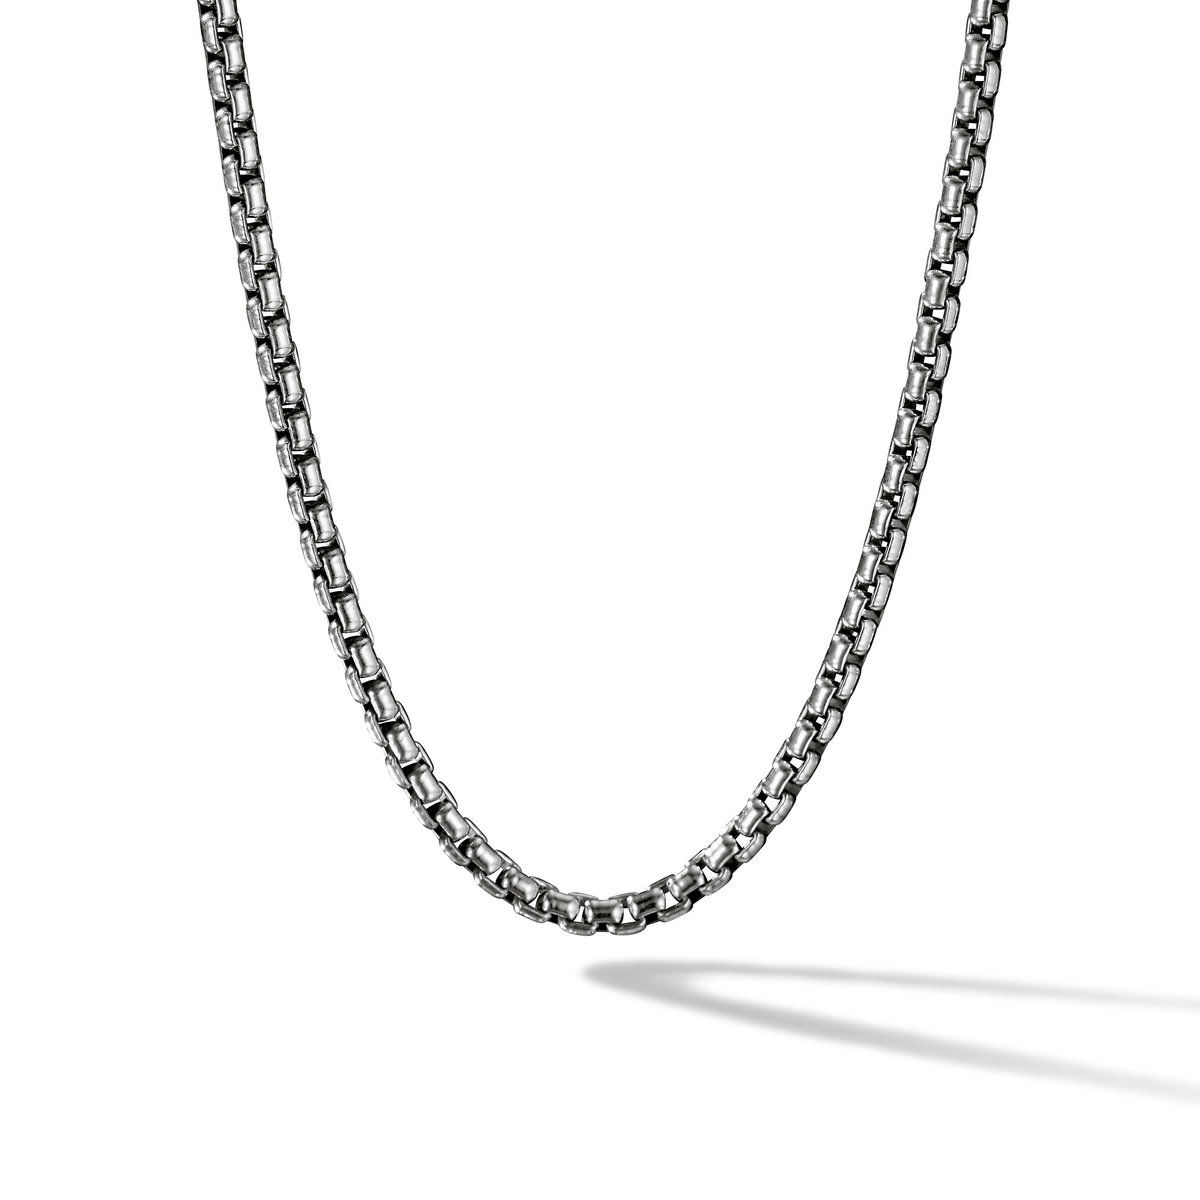 Movado  Sphere Lock Collection sterling silver necklace with a twisting lock  pendant